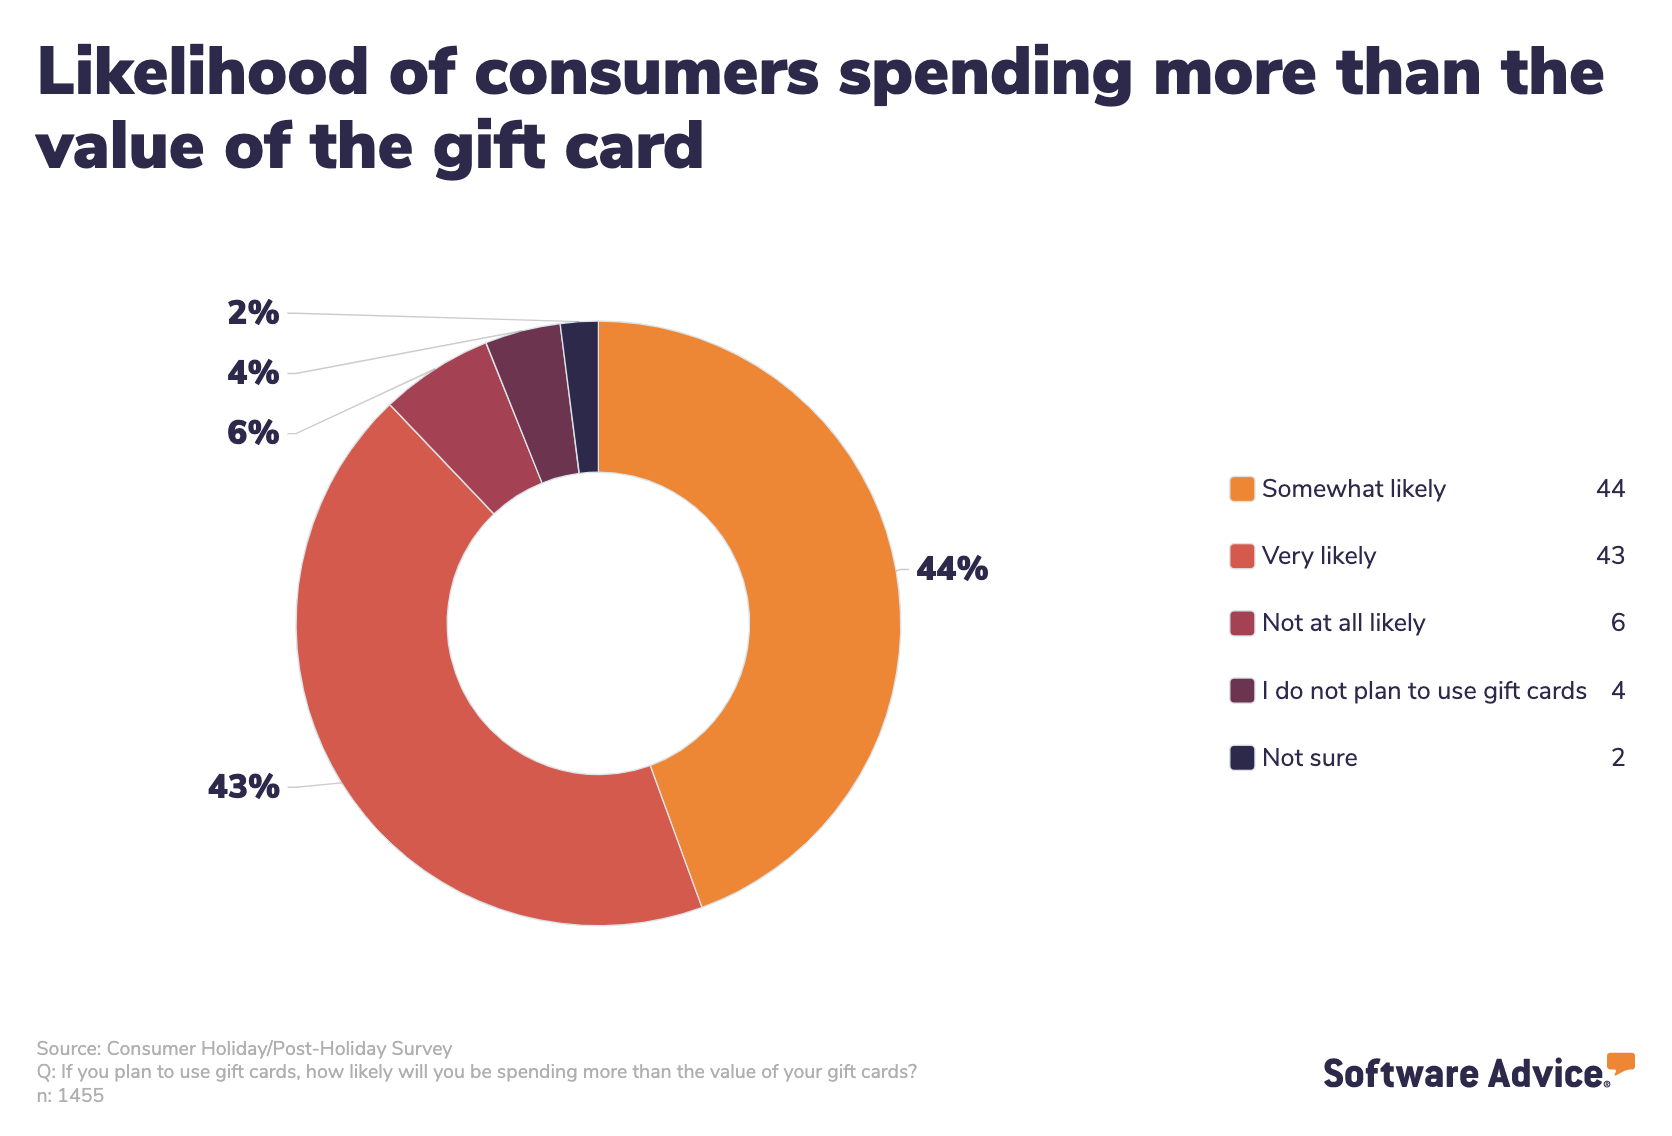 likelihood-of-consumers-spending-more-than-gift-card-value